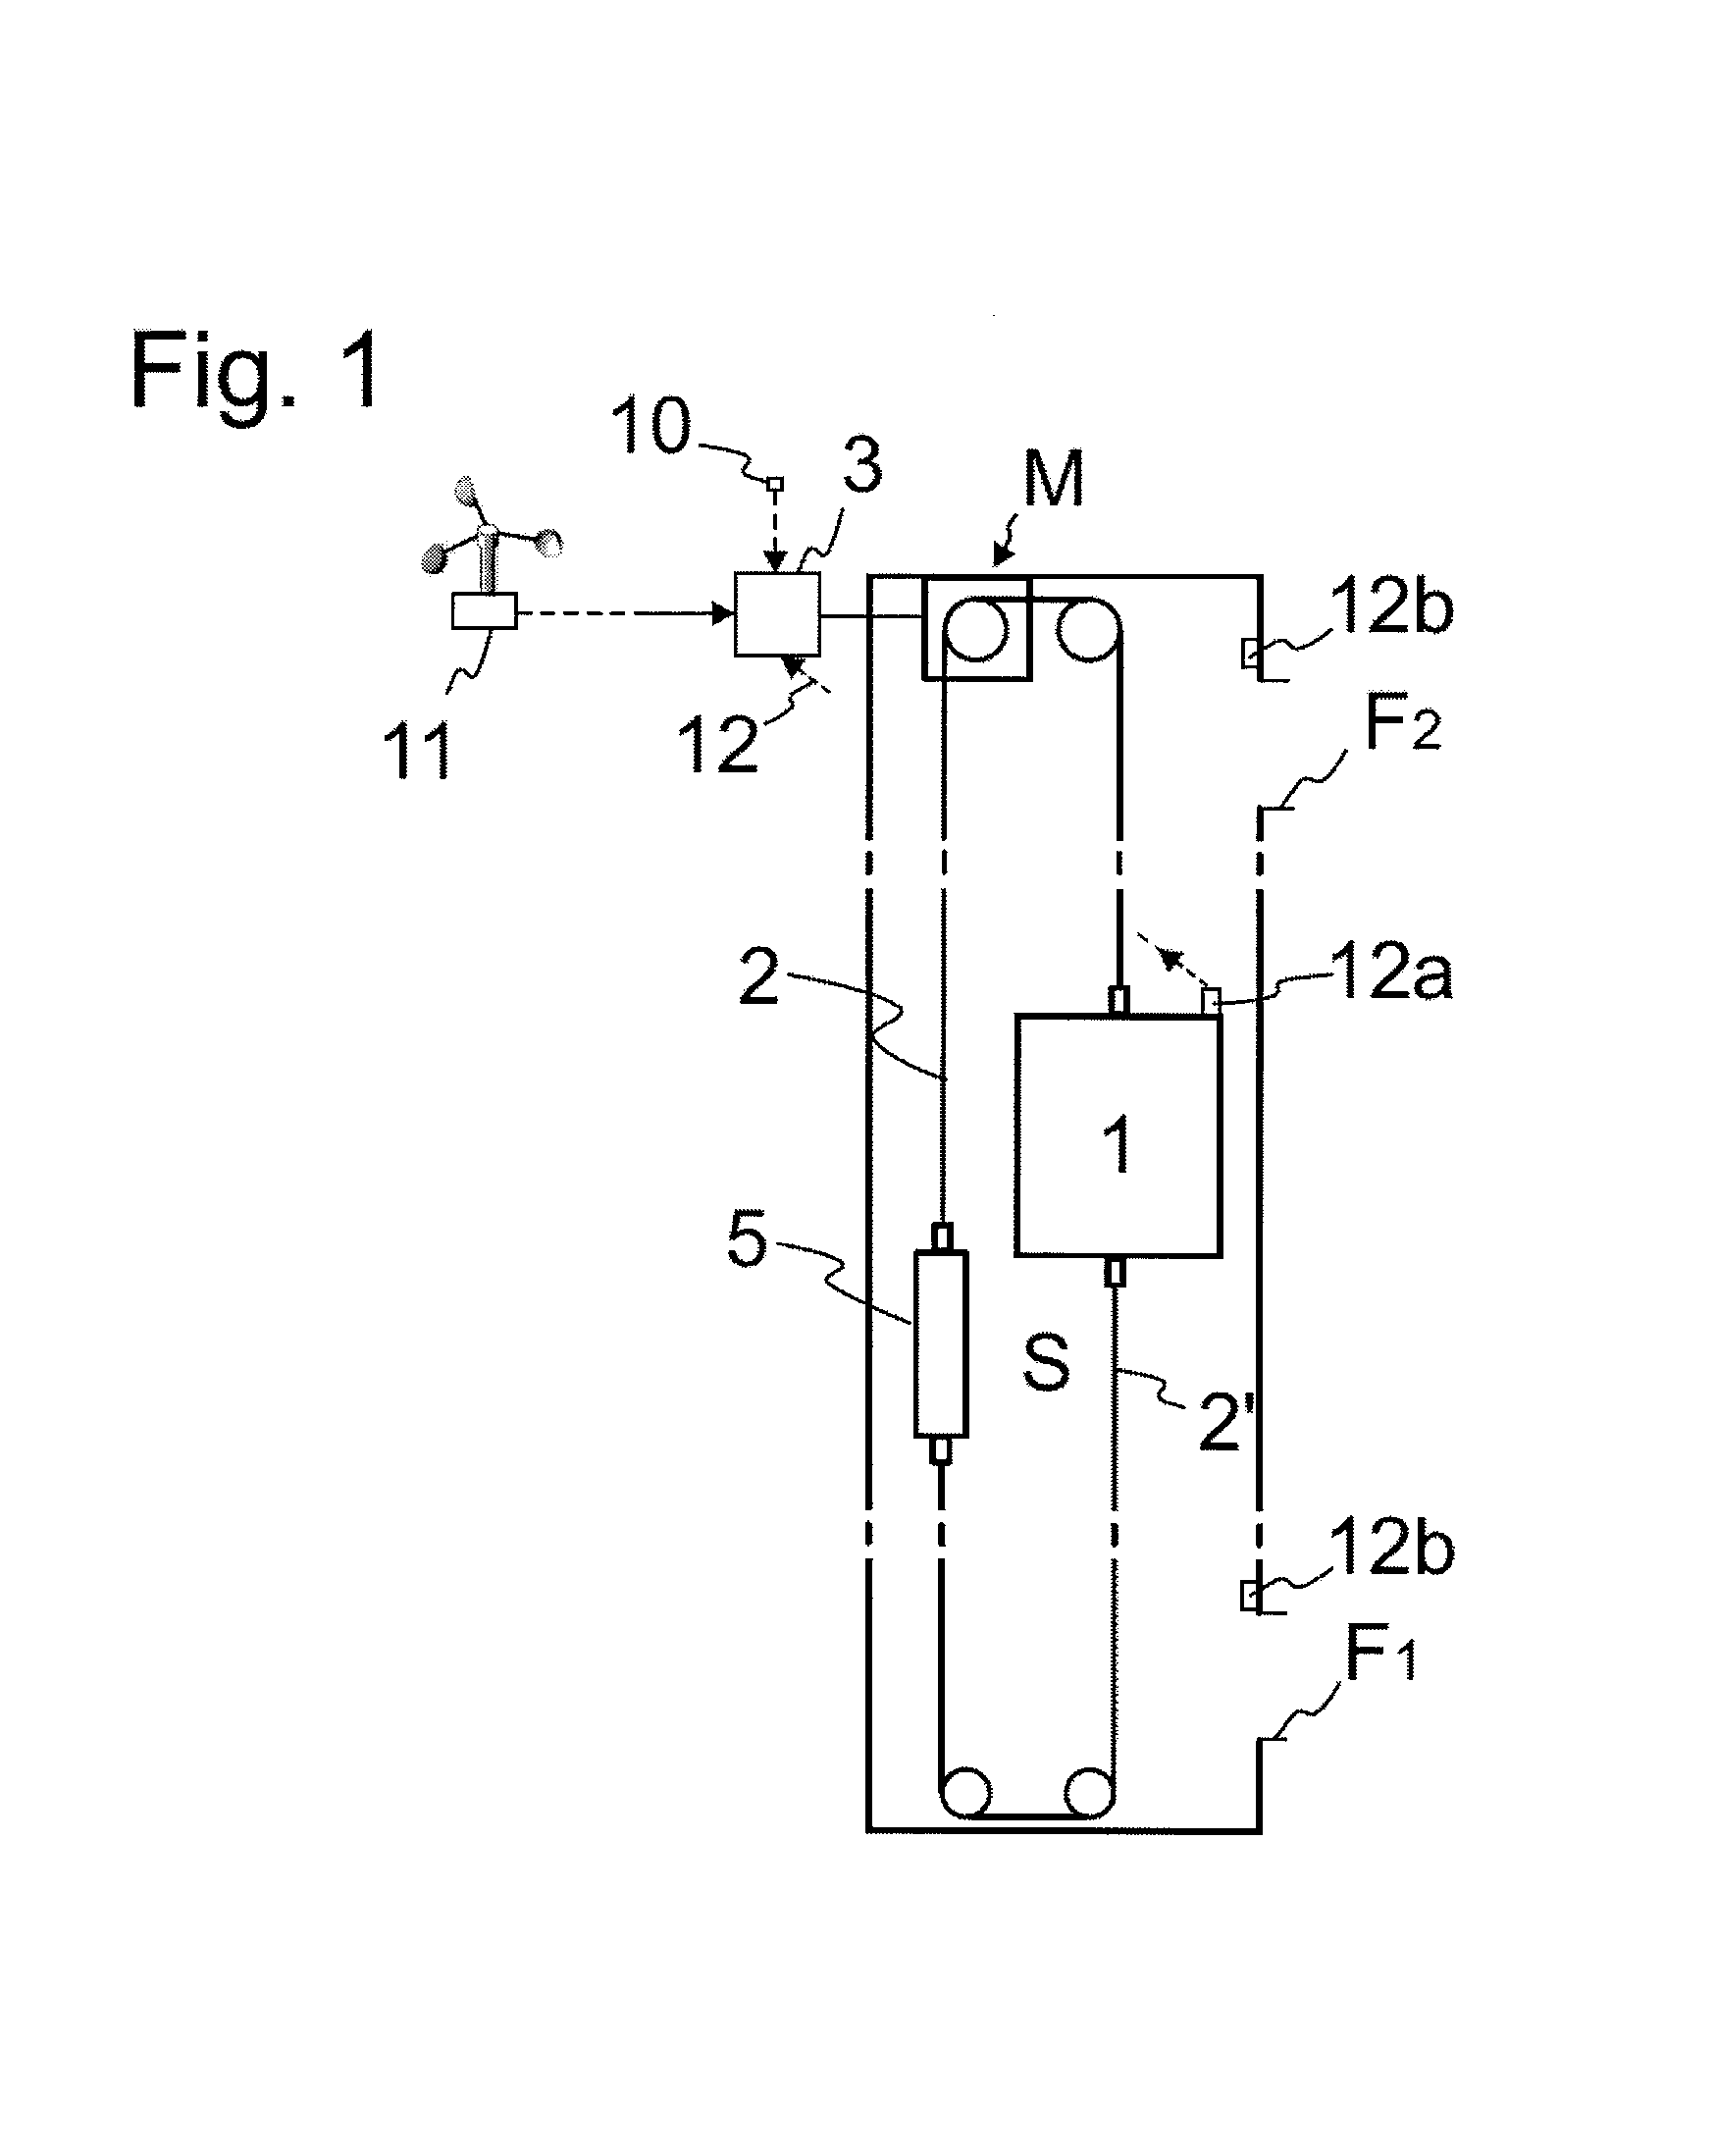 Method for controlling an elevator, and an elevator using starting position data of the elevator and sway data of the building